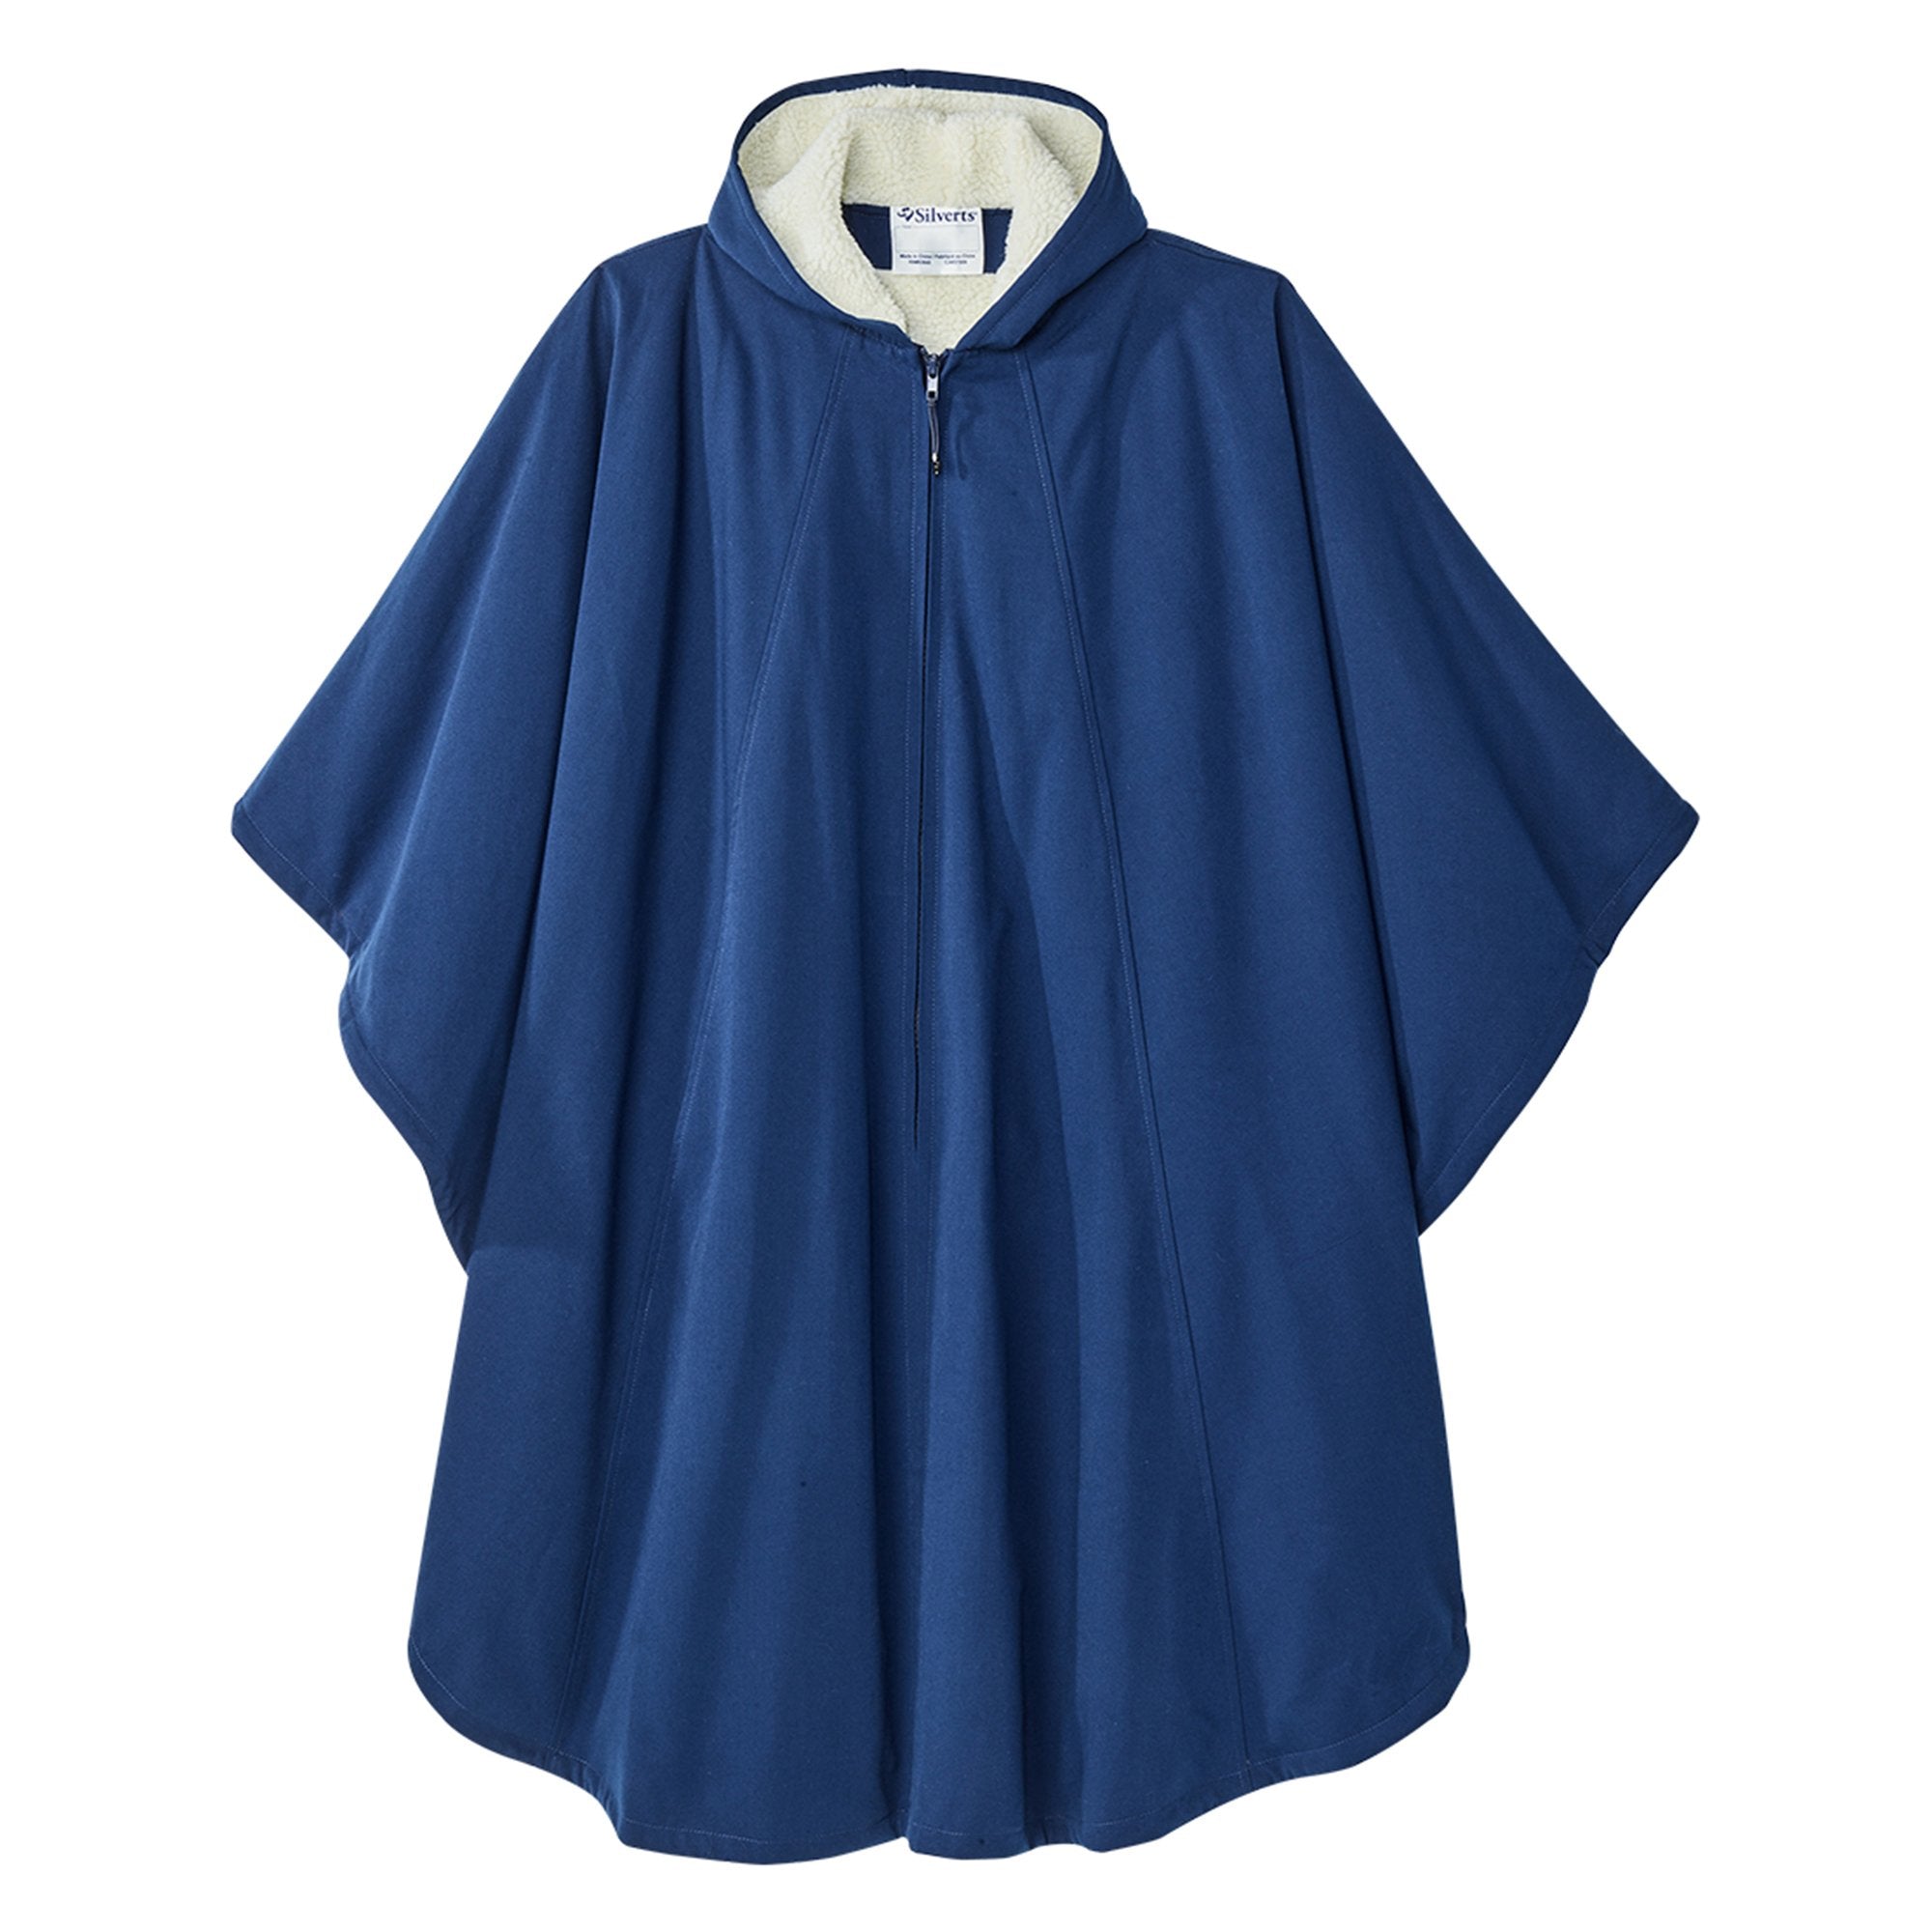 Silverts? Luxurious Fur-Lined Winter Wheelchair Cape, Navy Blue